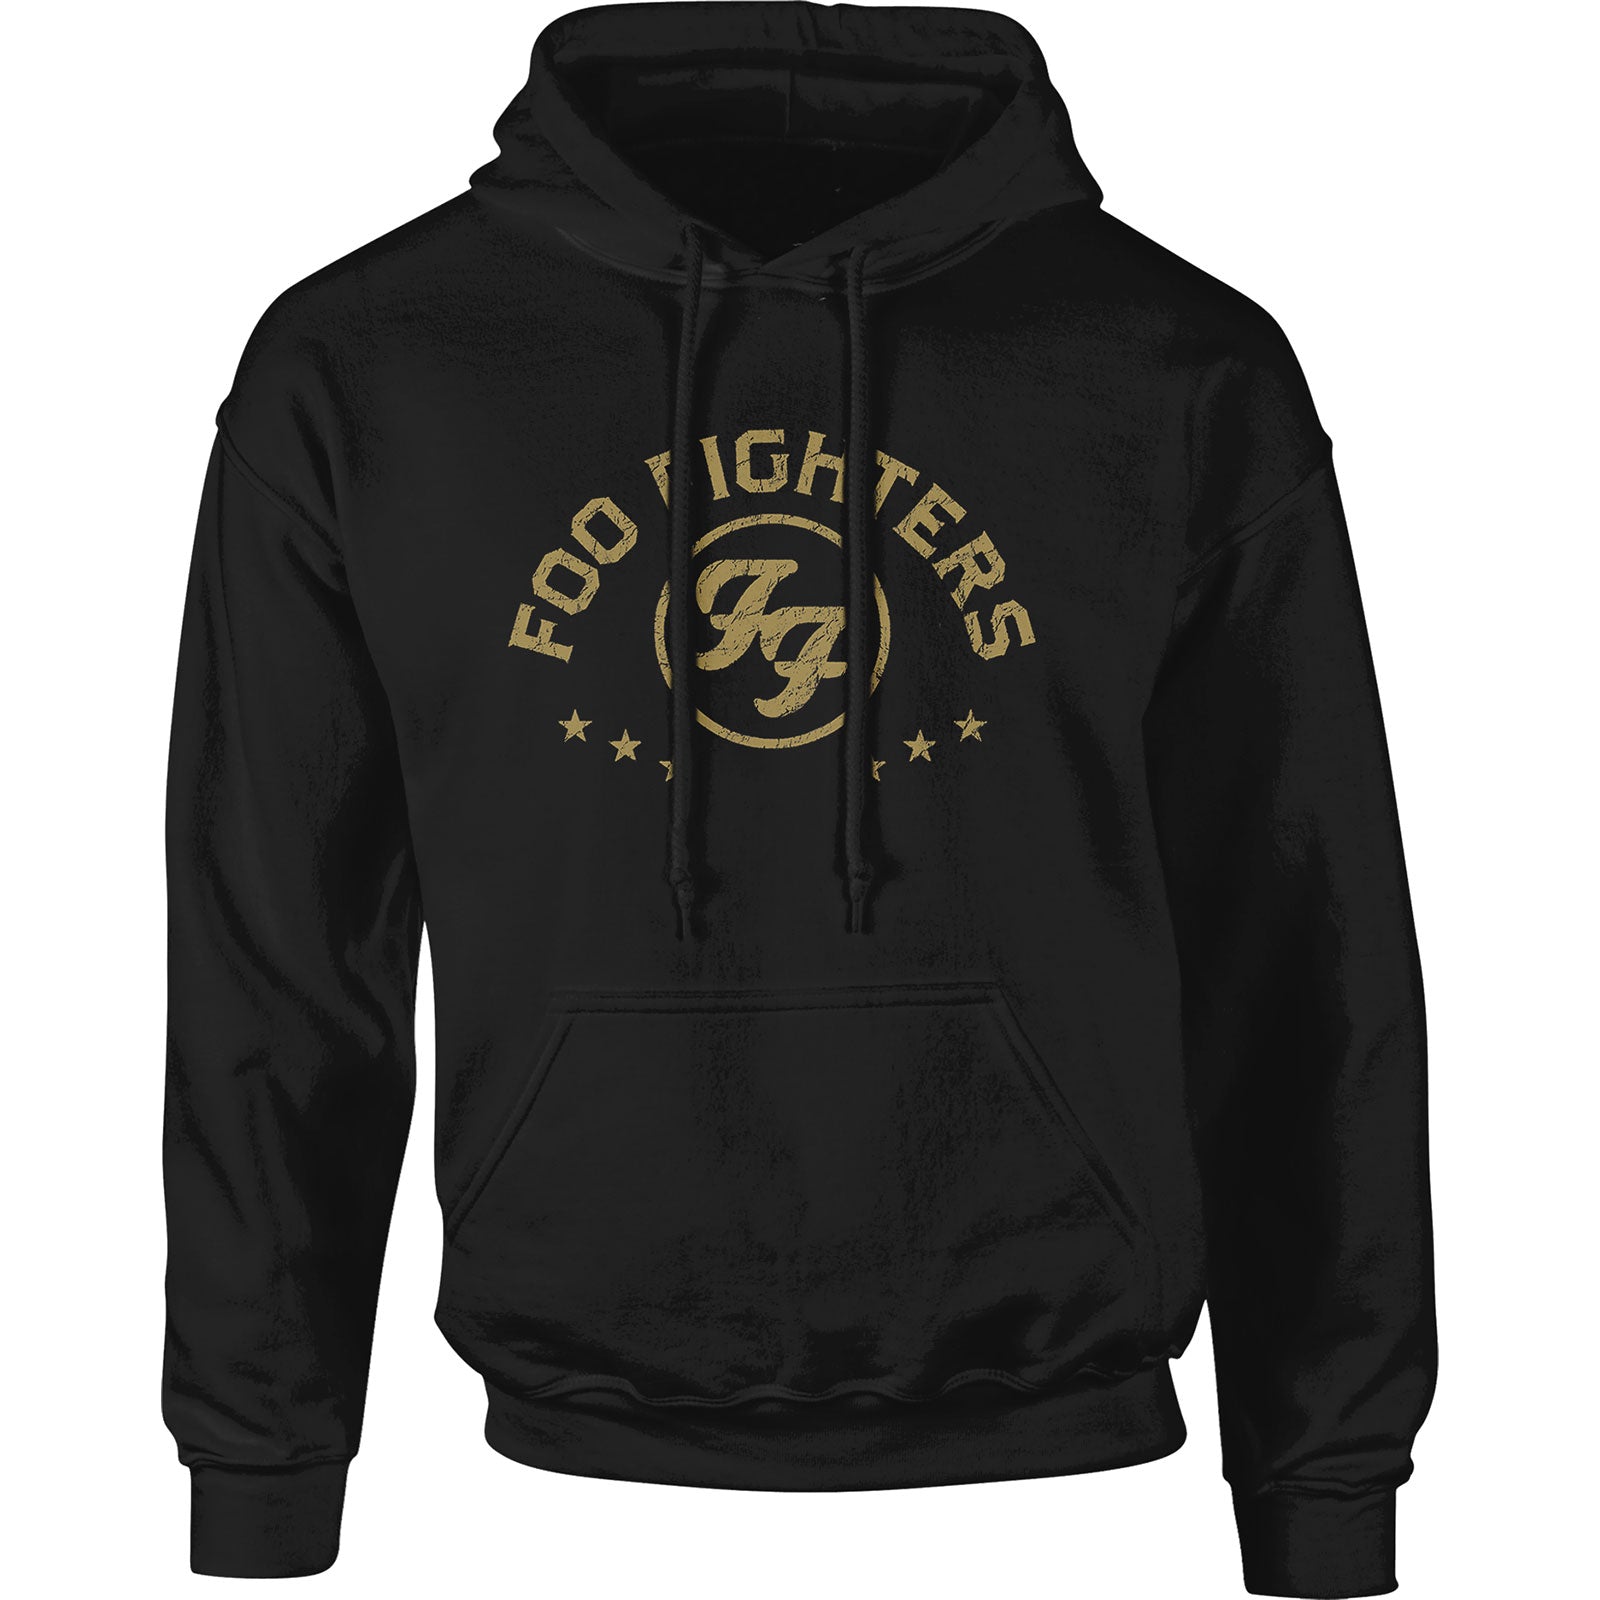 Hoodie - Foo Fighters Arched Stars